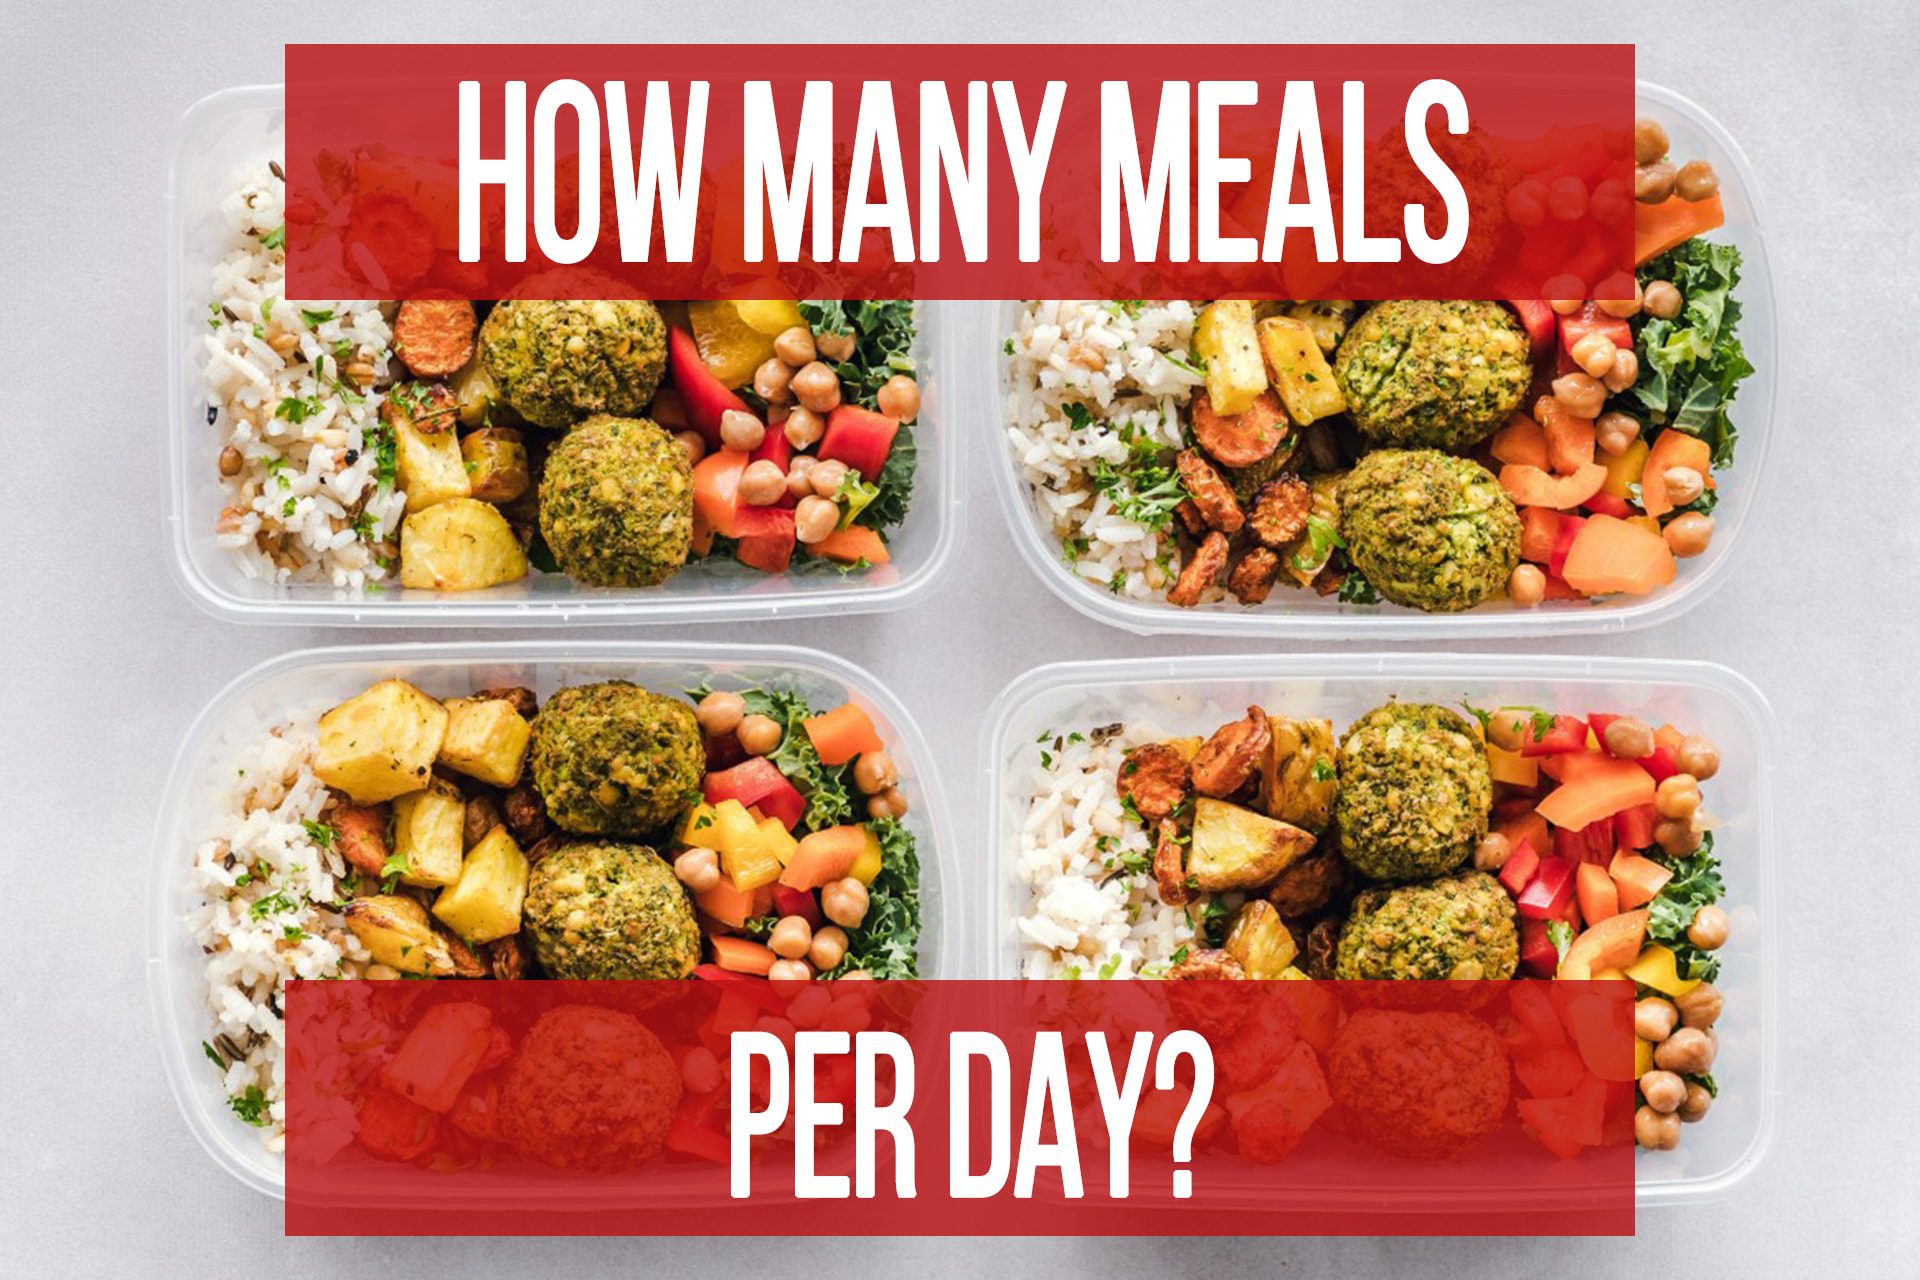 how-many-meals-per-day-is-best-n1-training